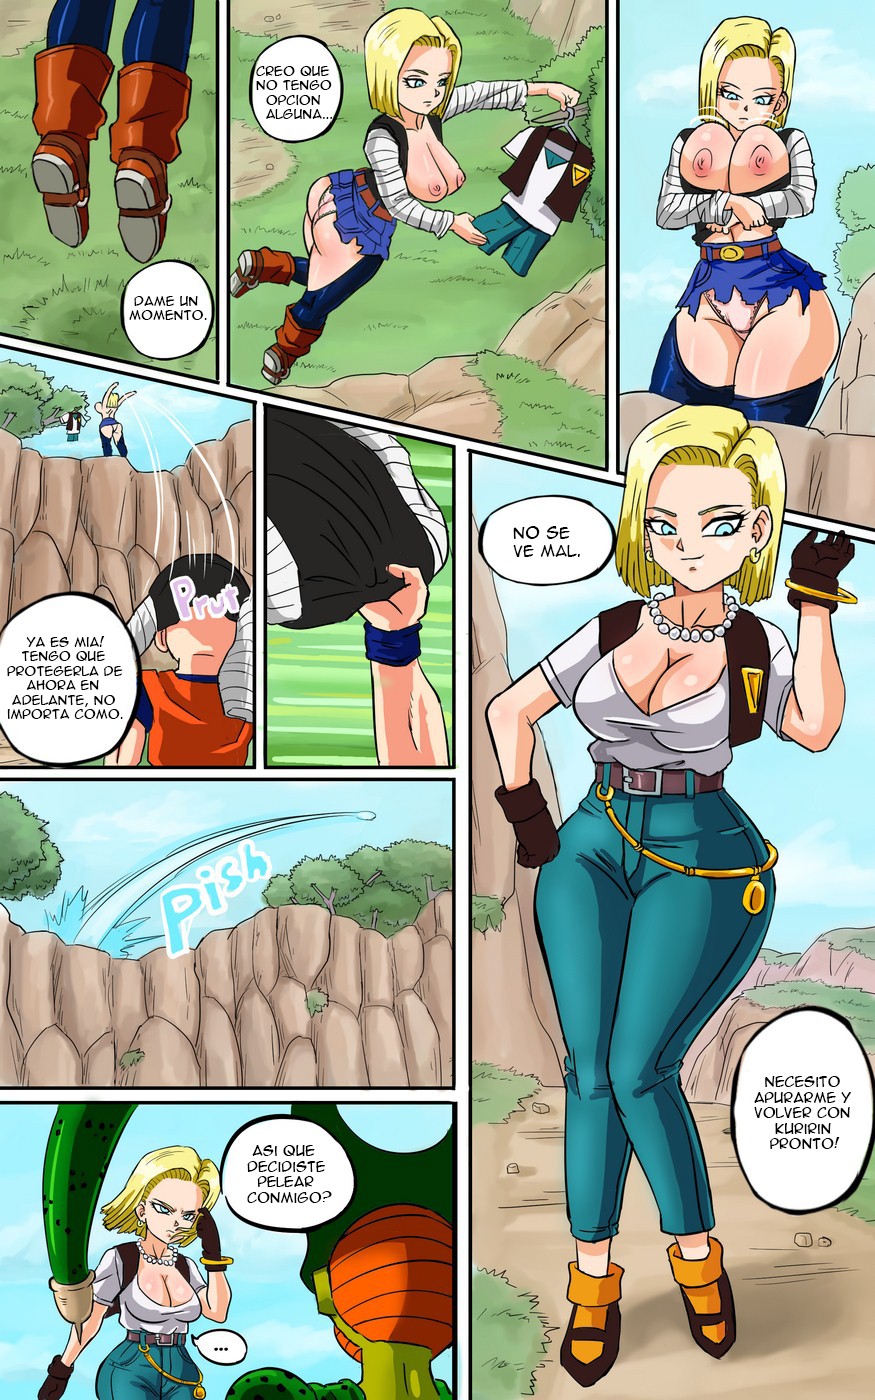 ANDROID 18 meets Krillin